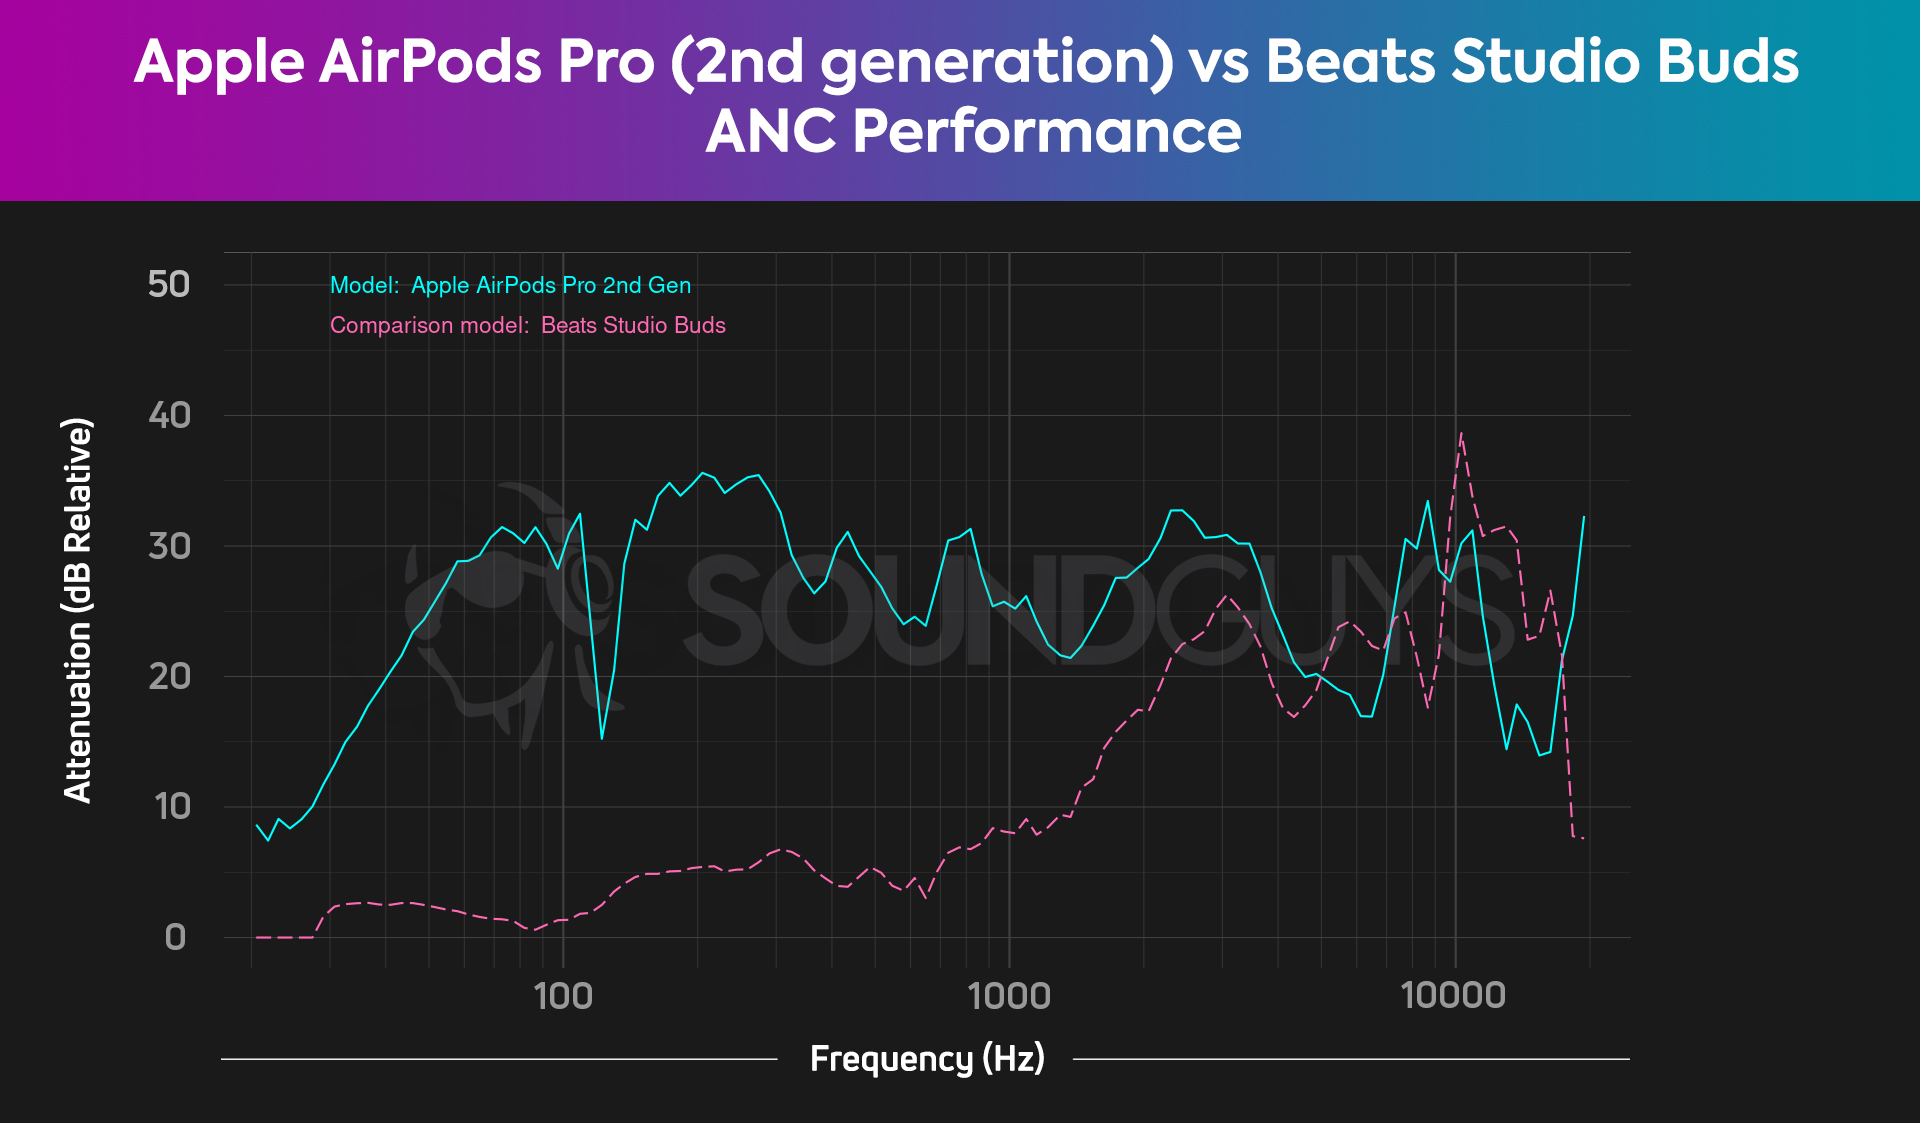 The Apple AirPods Pro 2nd generation and Beats Studio Buds active noise canceling comparison chart, shwoing generally better ANC performance by the Apple AirPods.